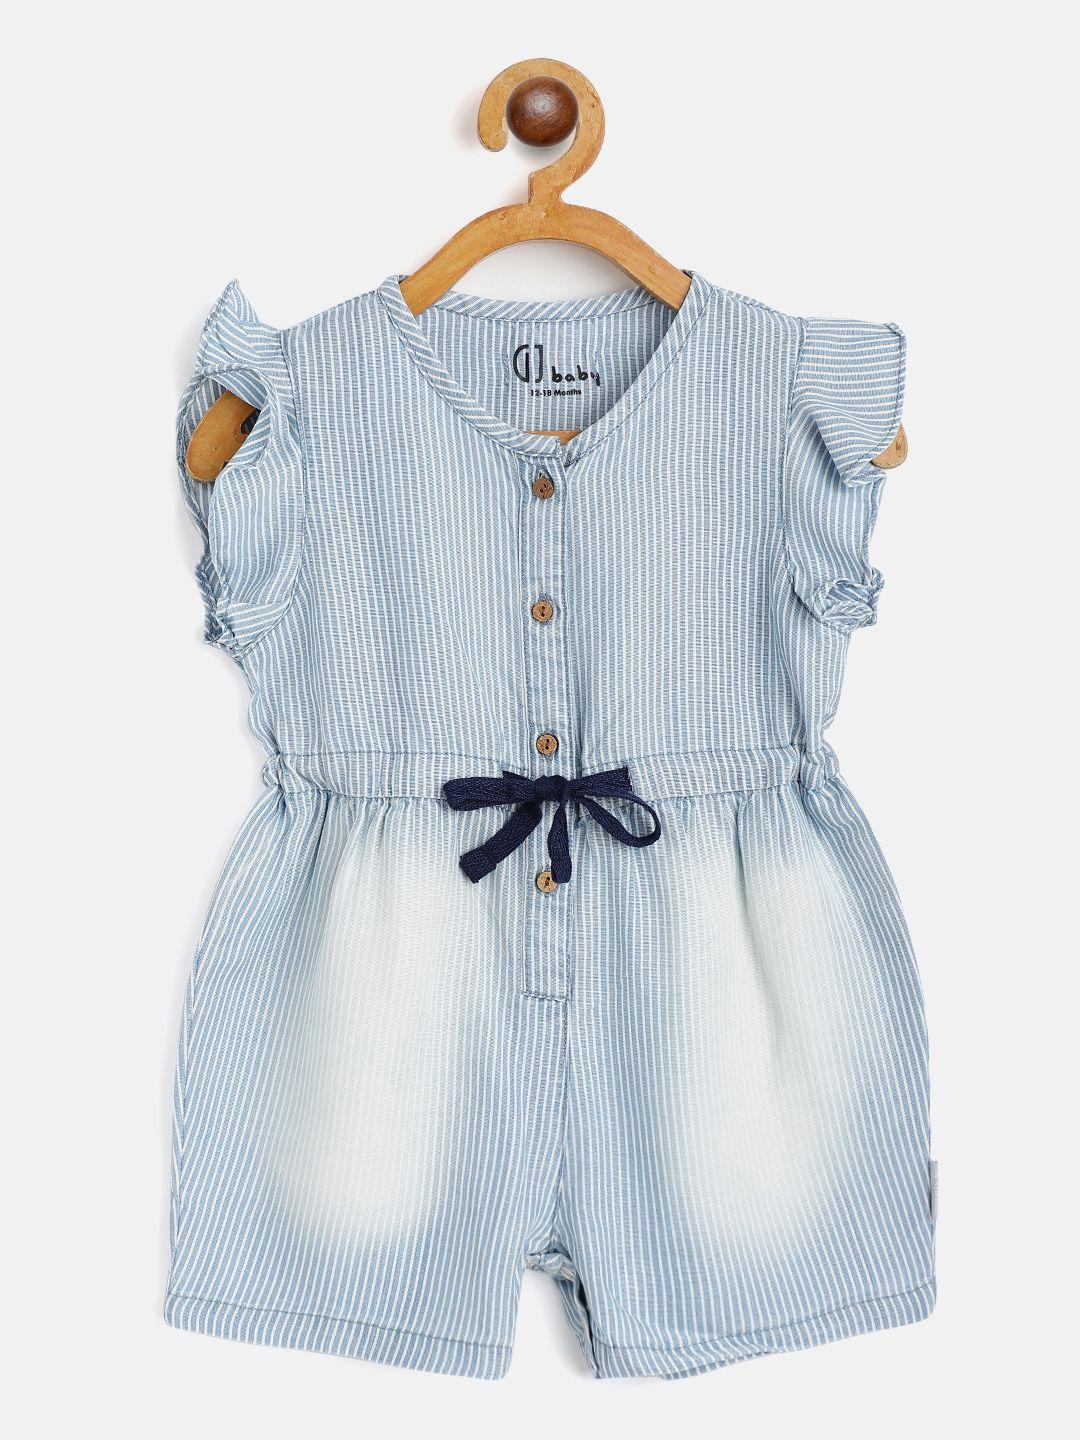 gini-and-jony-infant-girls-blue-&-white-striped-rompers